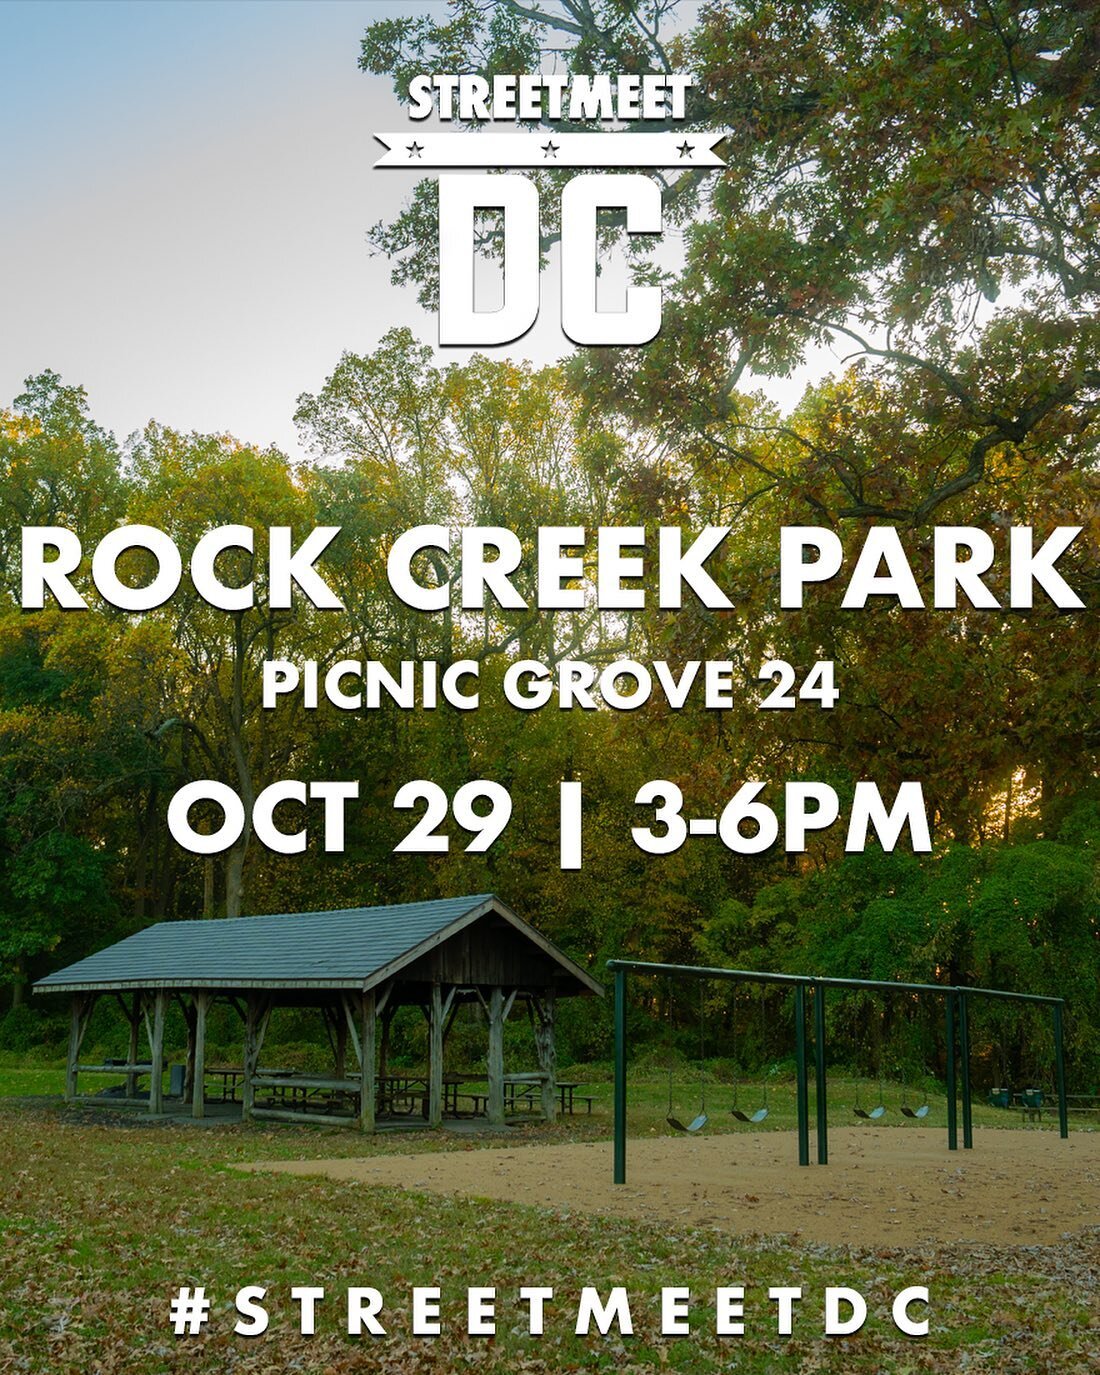 Join us this Saturday, October 29th from 3-6pm at Rock Creek Park (Picnic Grove 24). Peak foliage is upon us! Get those Ugg boots dusted off, cozy sweaters and grey sweat pants ready for this meet. We&rsquo;ve reserved Picnic Grove 24 (and yes, it&rs